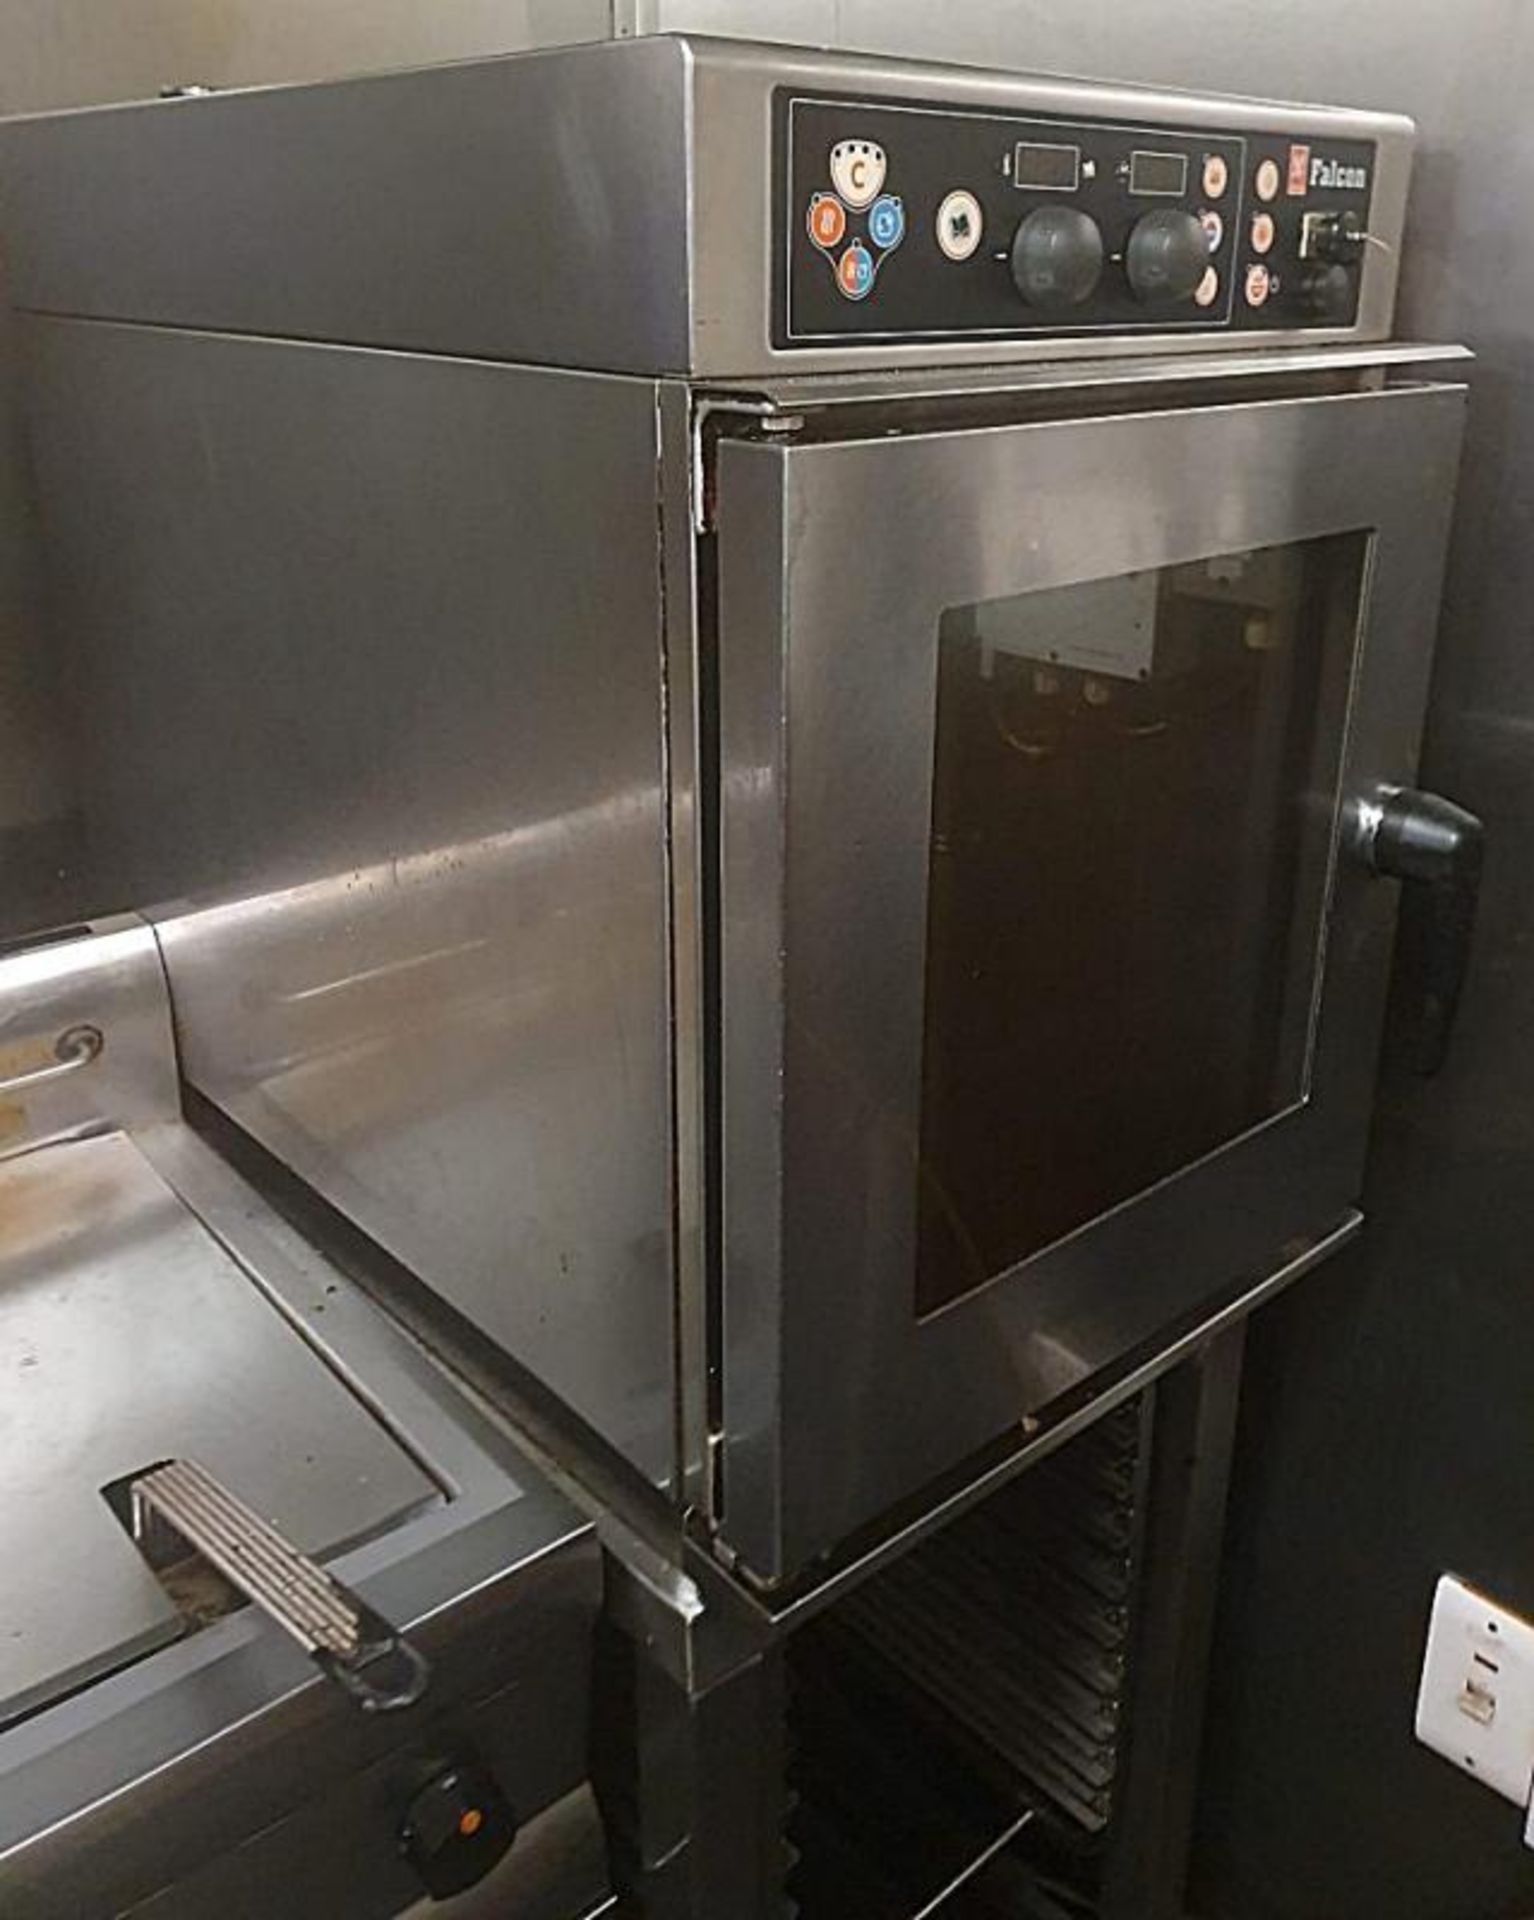 1 x FALCON Commercial 6-Grid Electric Combi Oven In Stainless Steel - Dimensions: 51 x 80 x H73cm + - Image 2 of 5